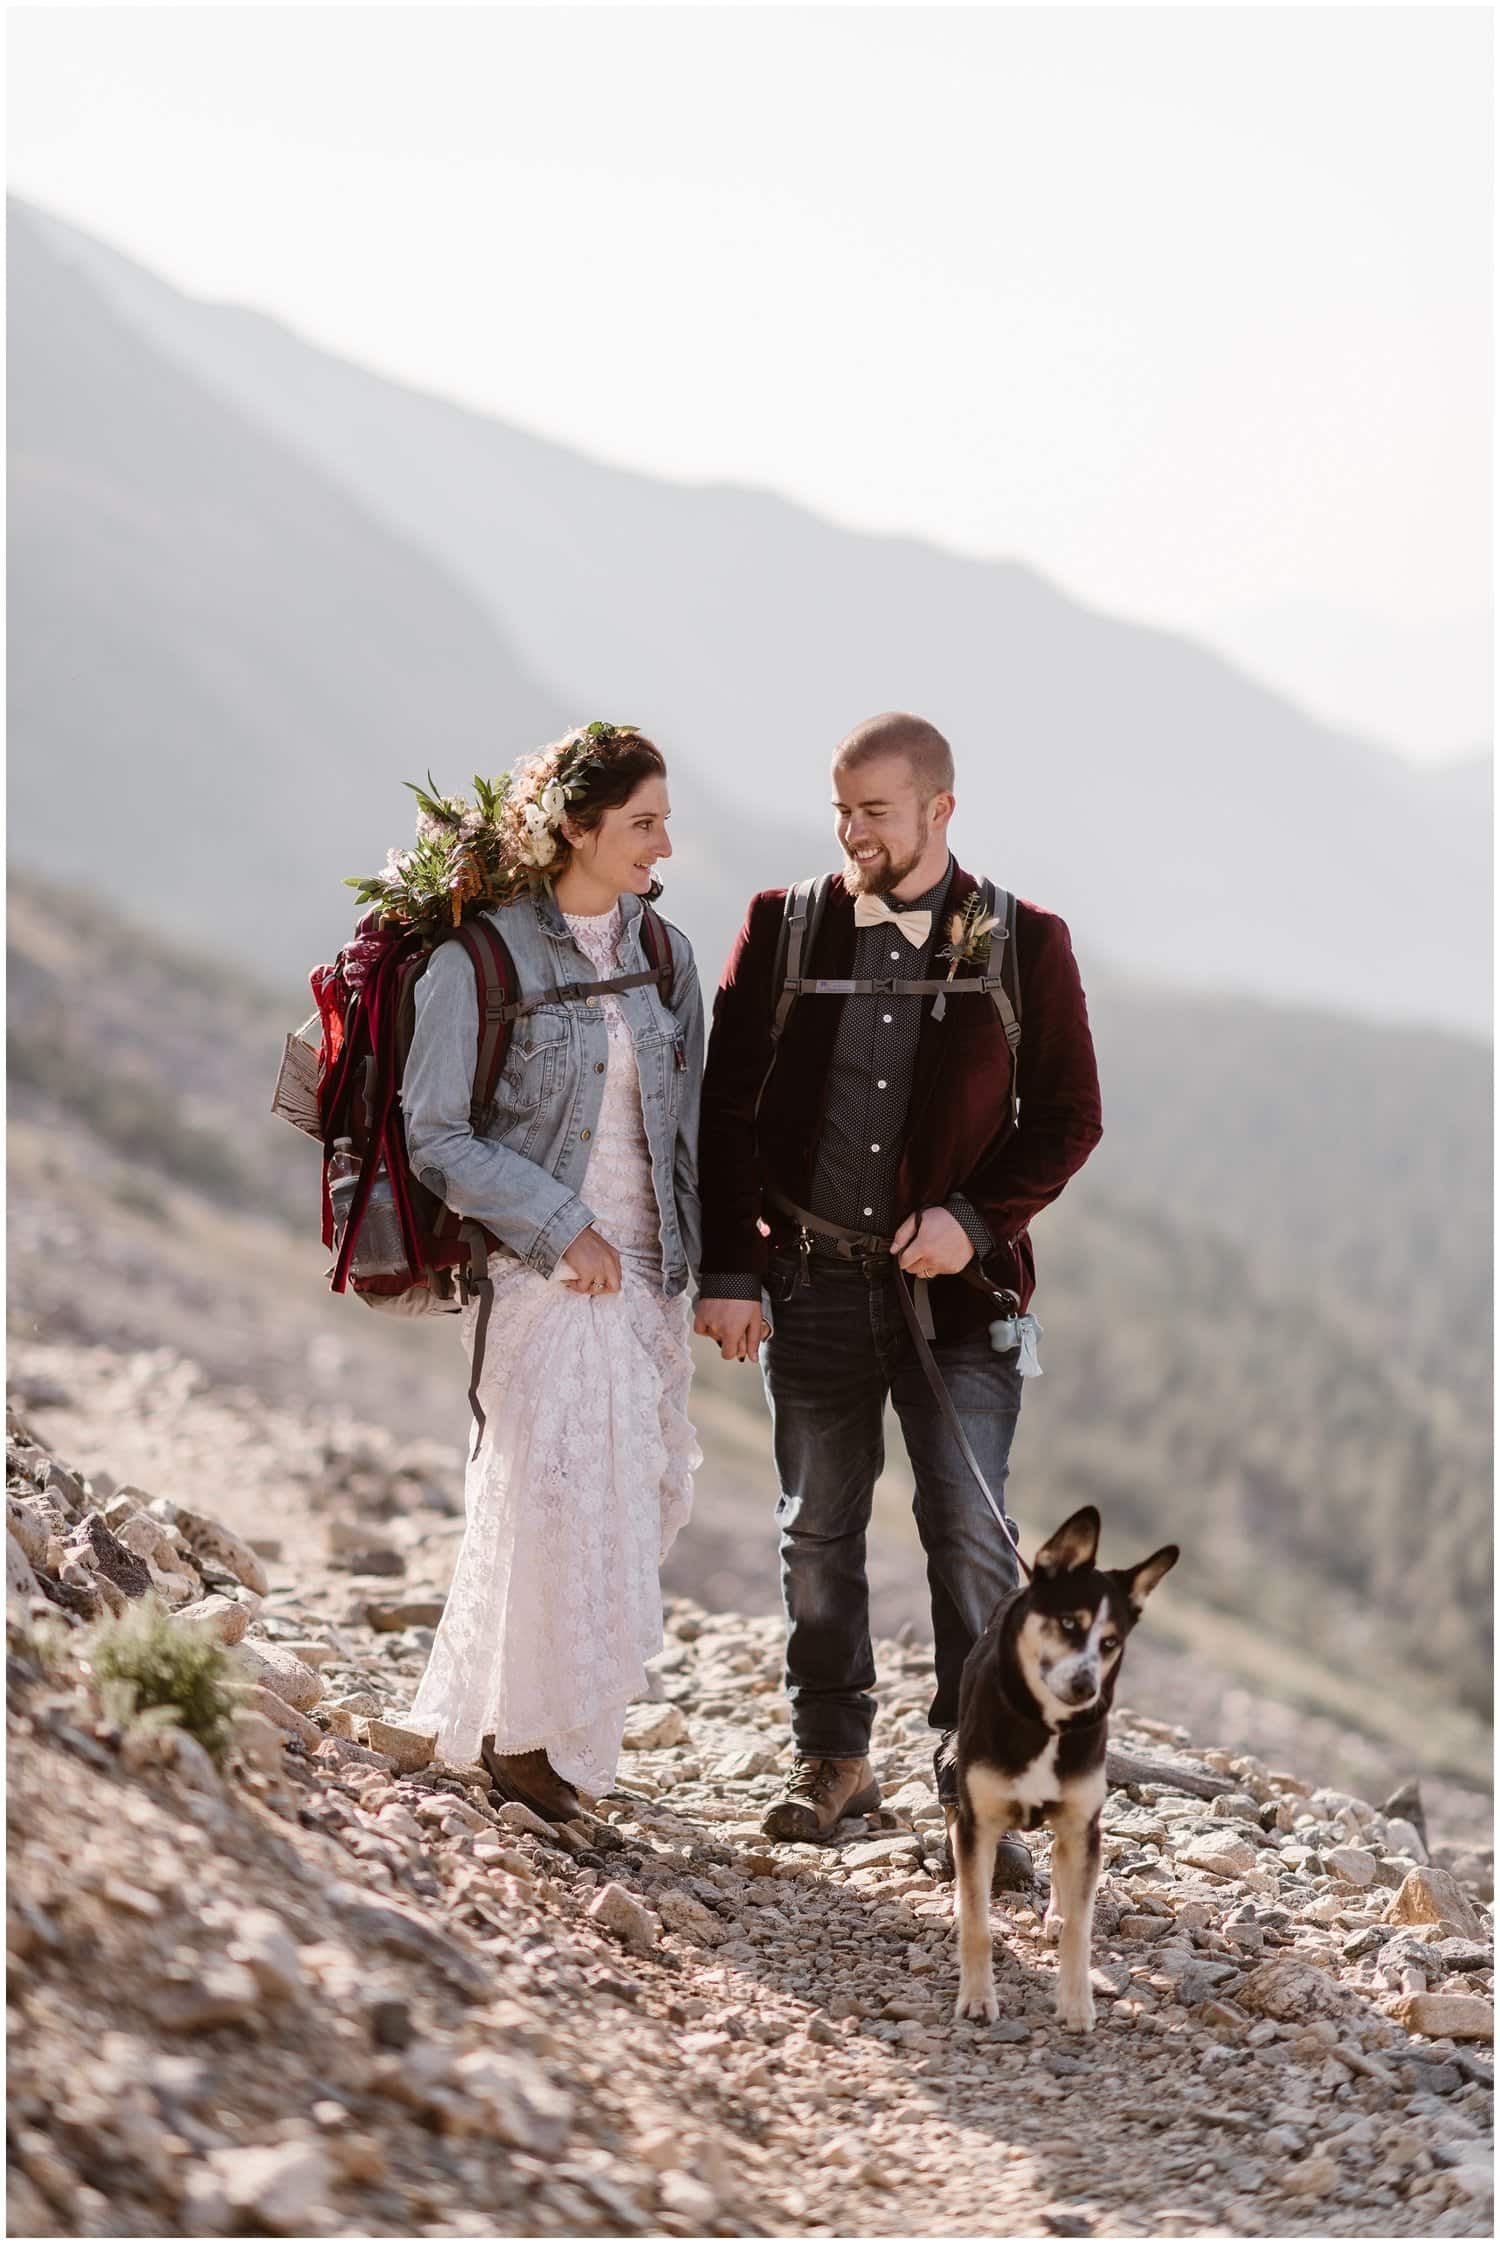 A bride and groom walk hand in hand while hiking with their dog on their wedding day.